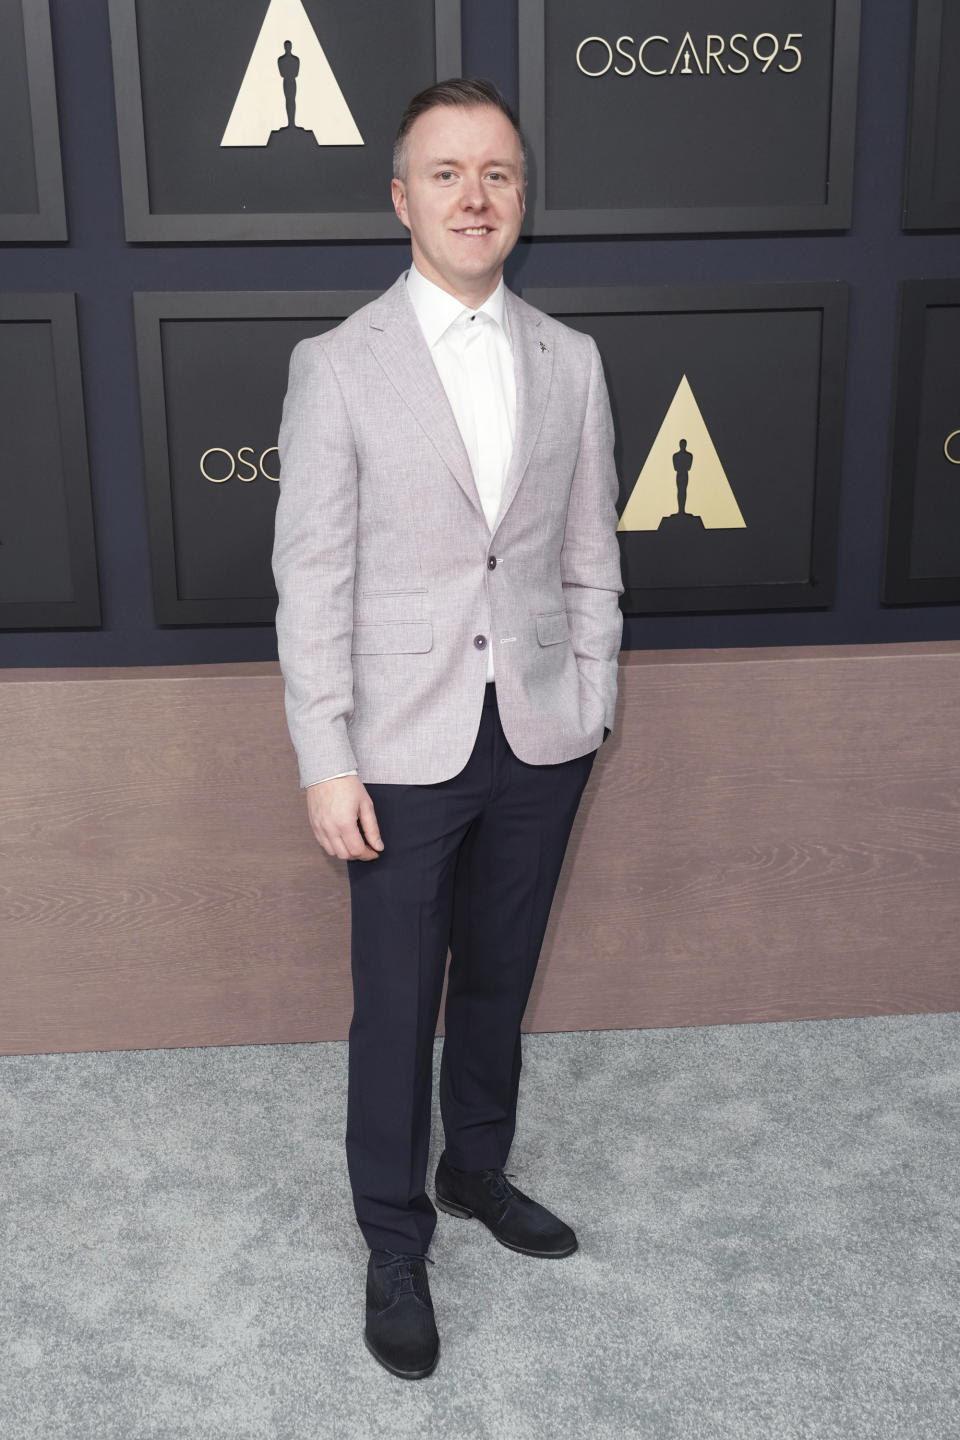 Colm Bairead arrives at the 95th Academy Awards Nominees Luncheon on Monday, Feb. 13, 2023, at the Beverly Hilton Hotel in Beverly Hills, Calif. (Photo by Jordan Strauss/Invision/AP)